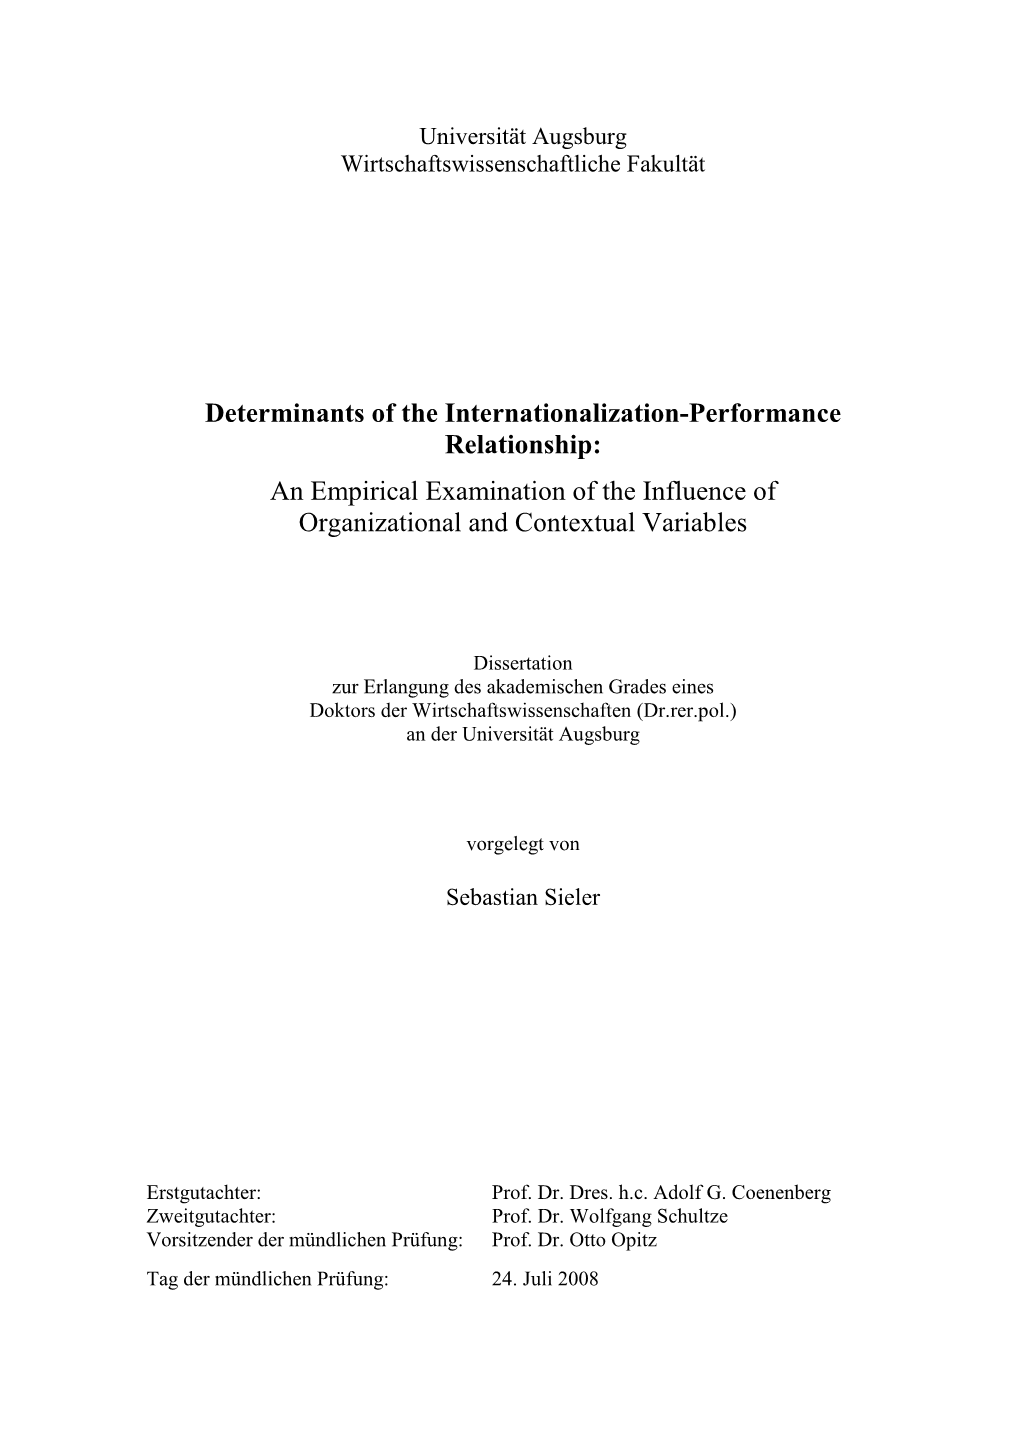 Determinants of the Internationalization-Performance Relationship: an Empirical Examination of the Influence of Organizational and Contextual Variables